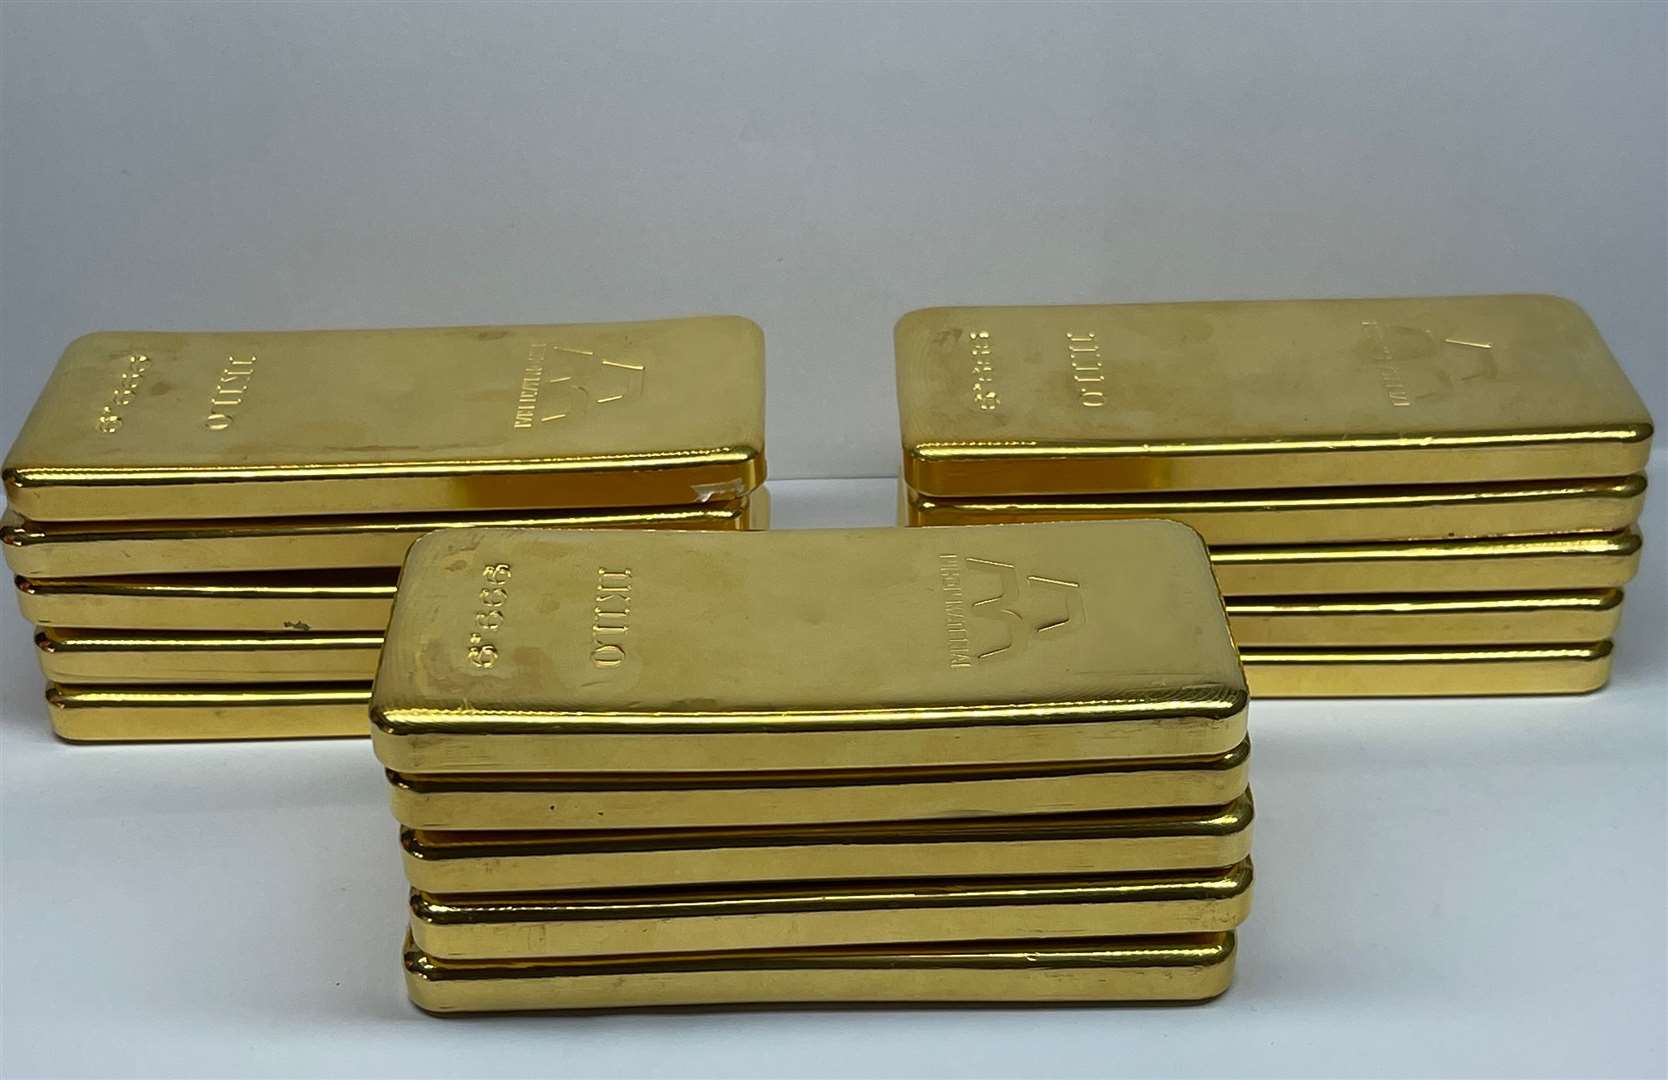 The gold bars estimated to be worth around £650,000. Picture: Wilsons Auctions